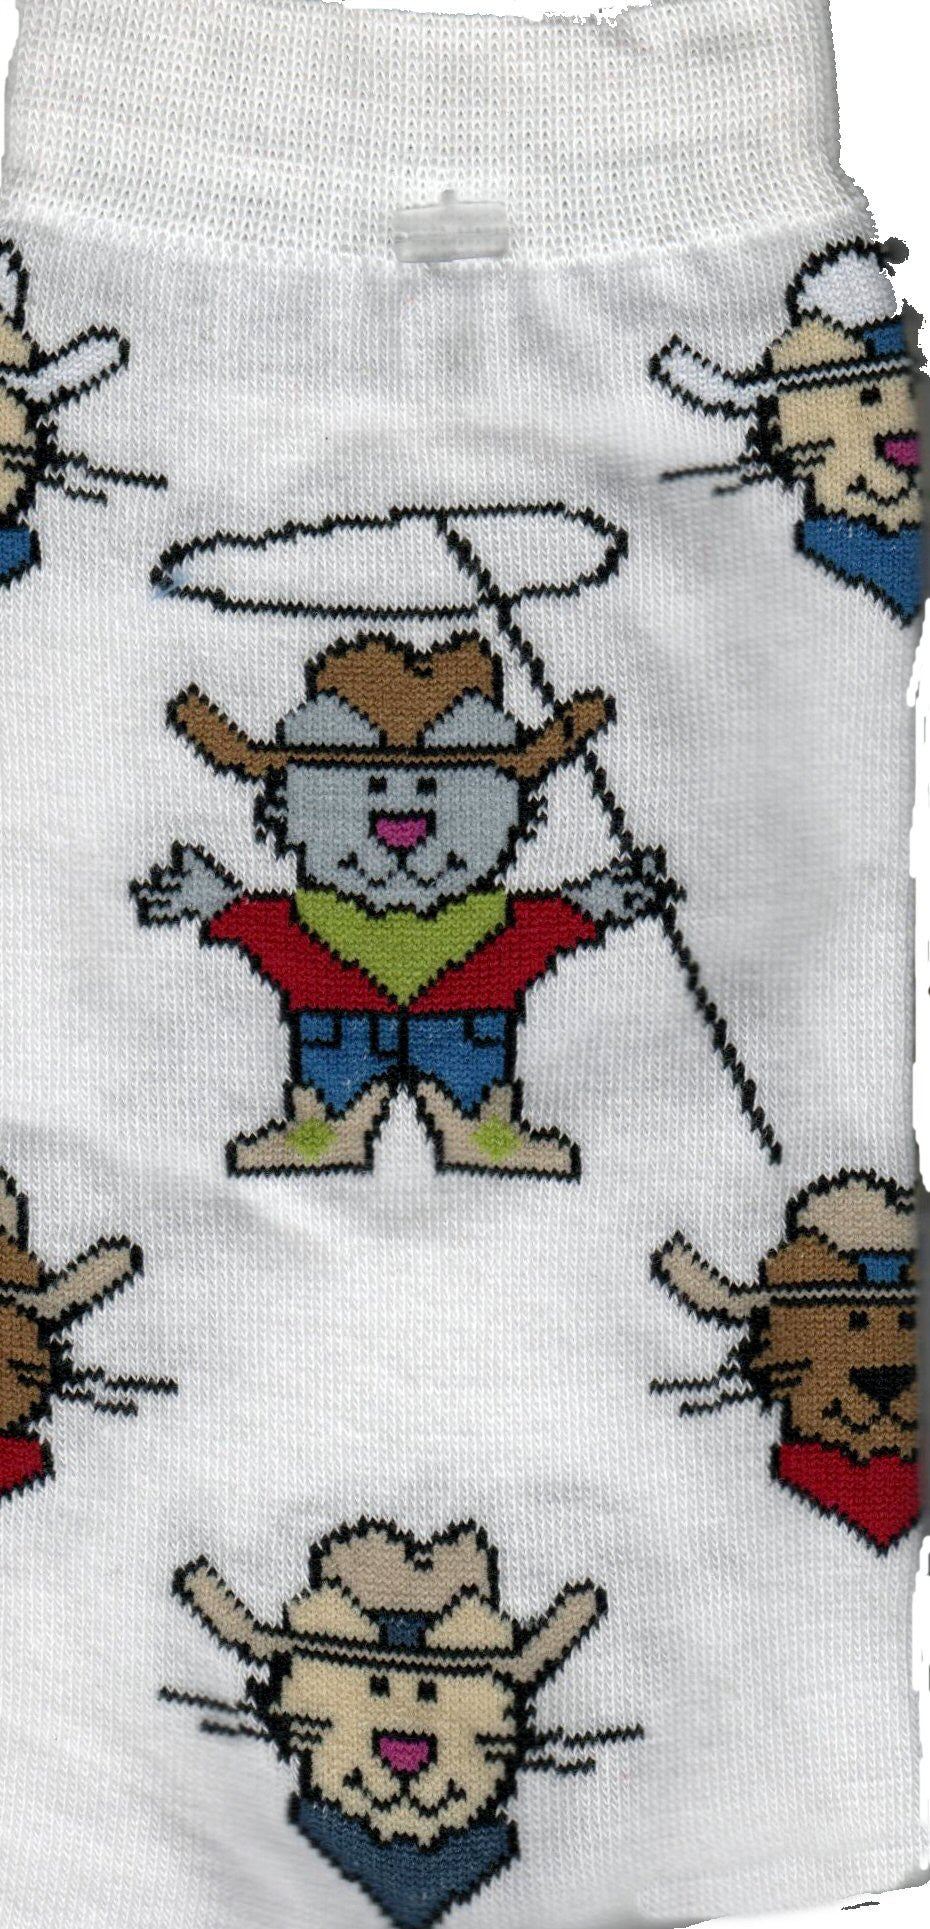 On a White background you have Cowboy Cats from K Bell with Cowboy Hats and Kerchiefs.